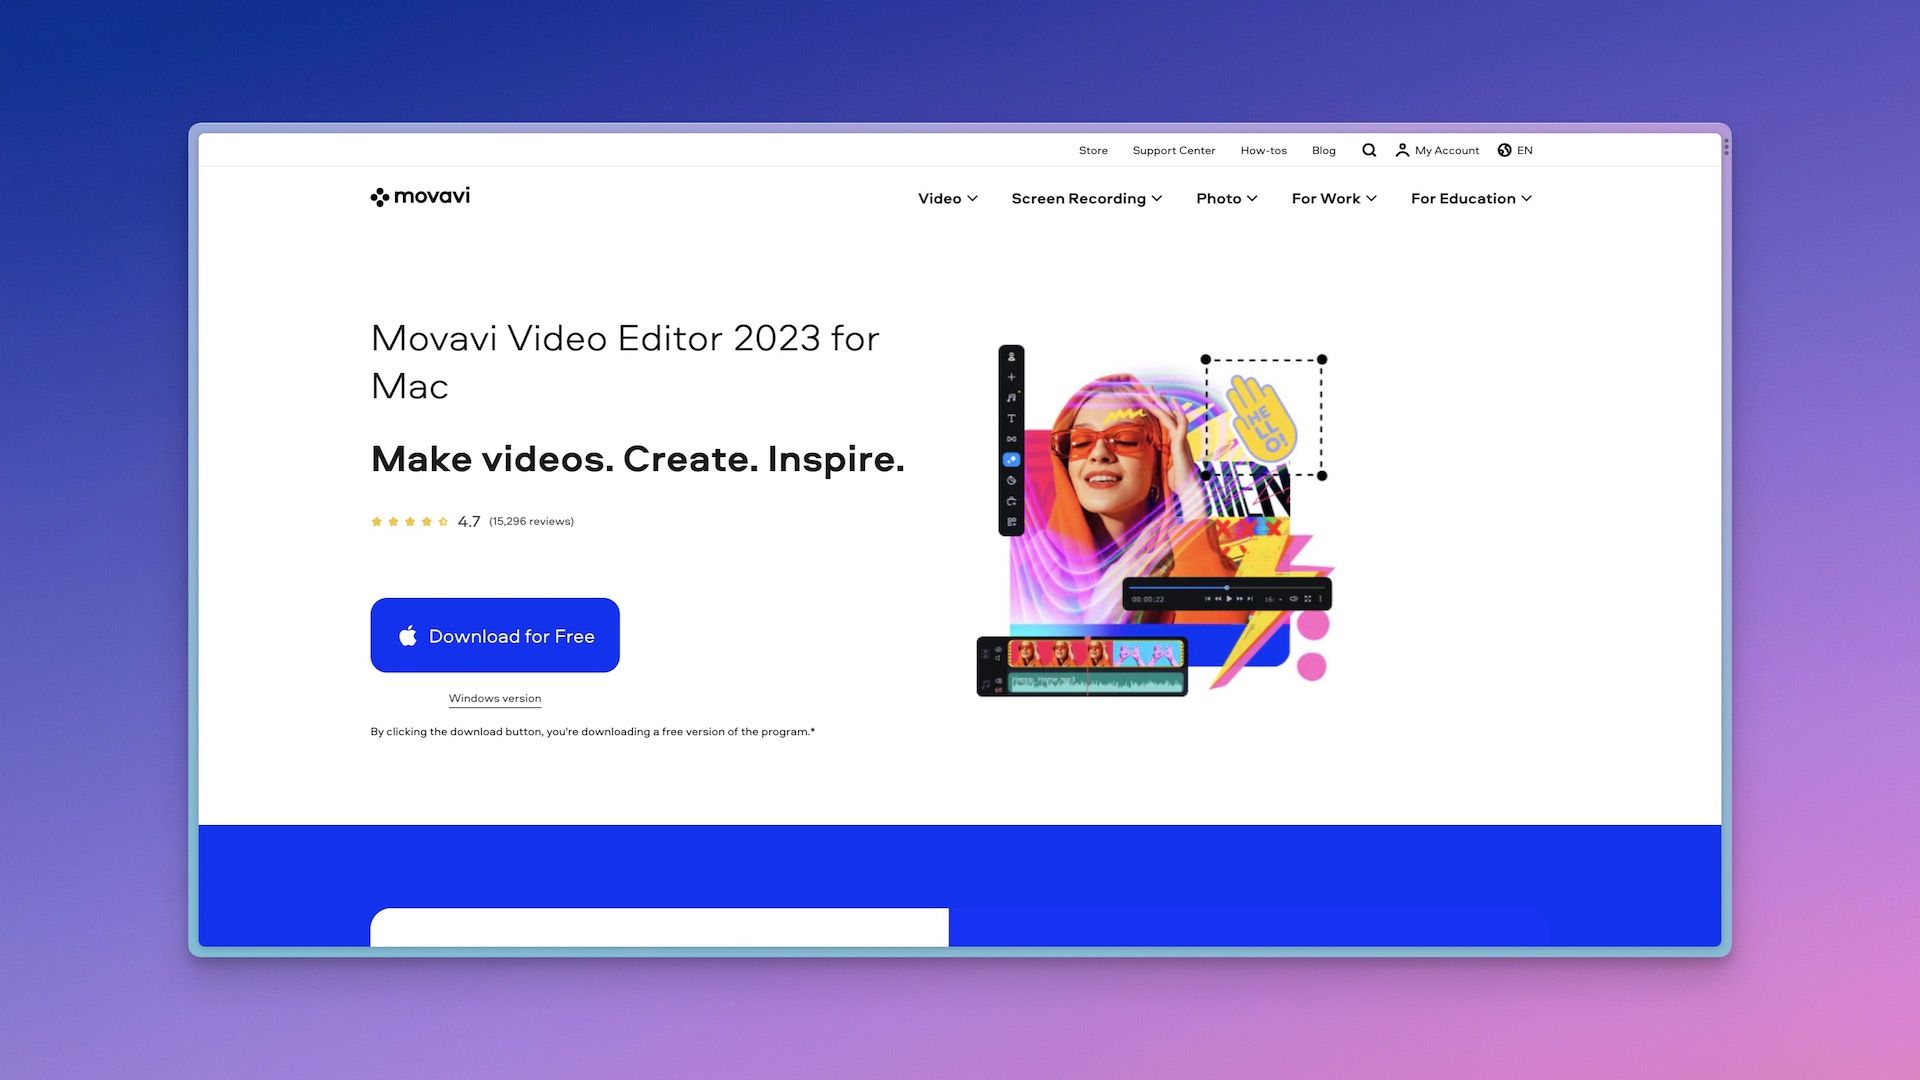 Movavi Video Editor: Great Video Editing Software for Mac with a Simple Interface